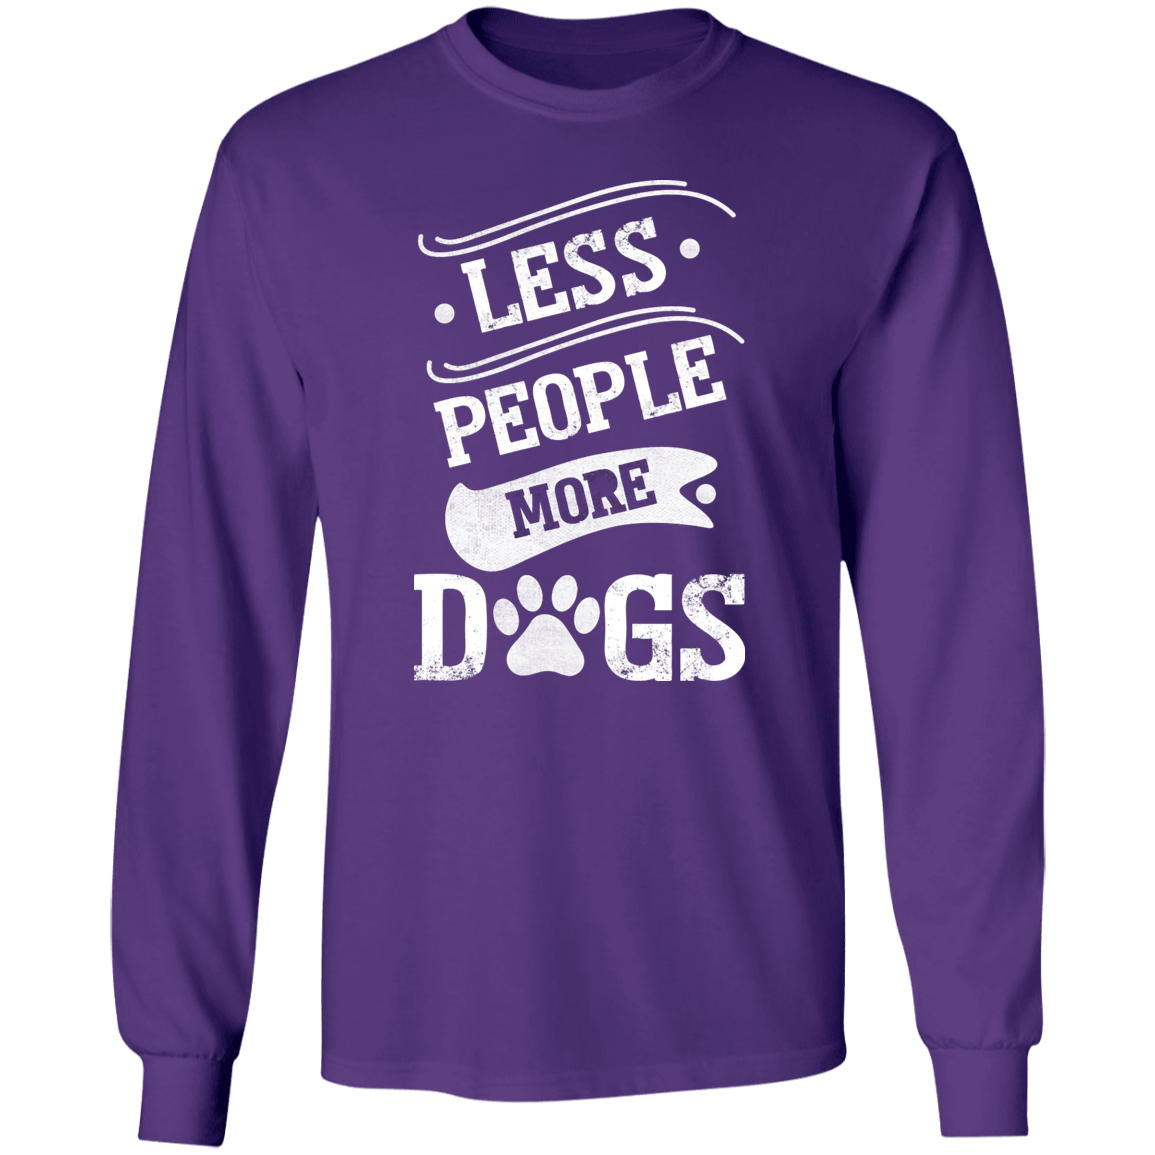 Less People More Dogs - Long Sleeve T Shirt.